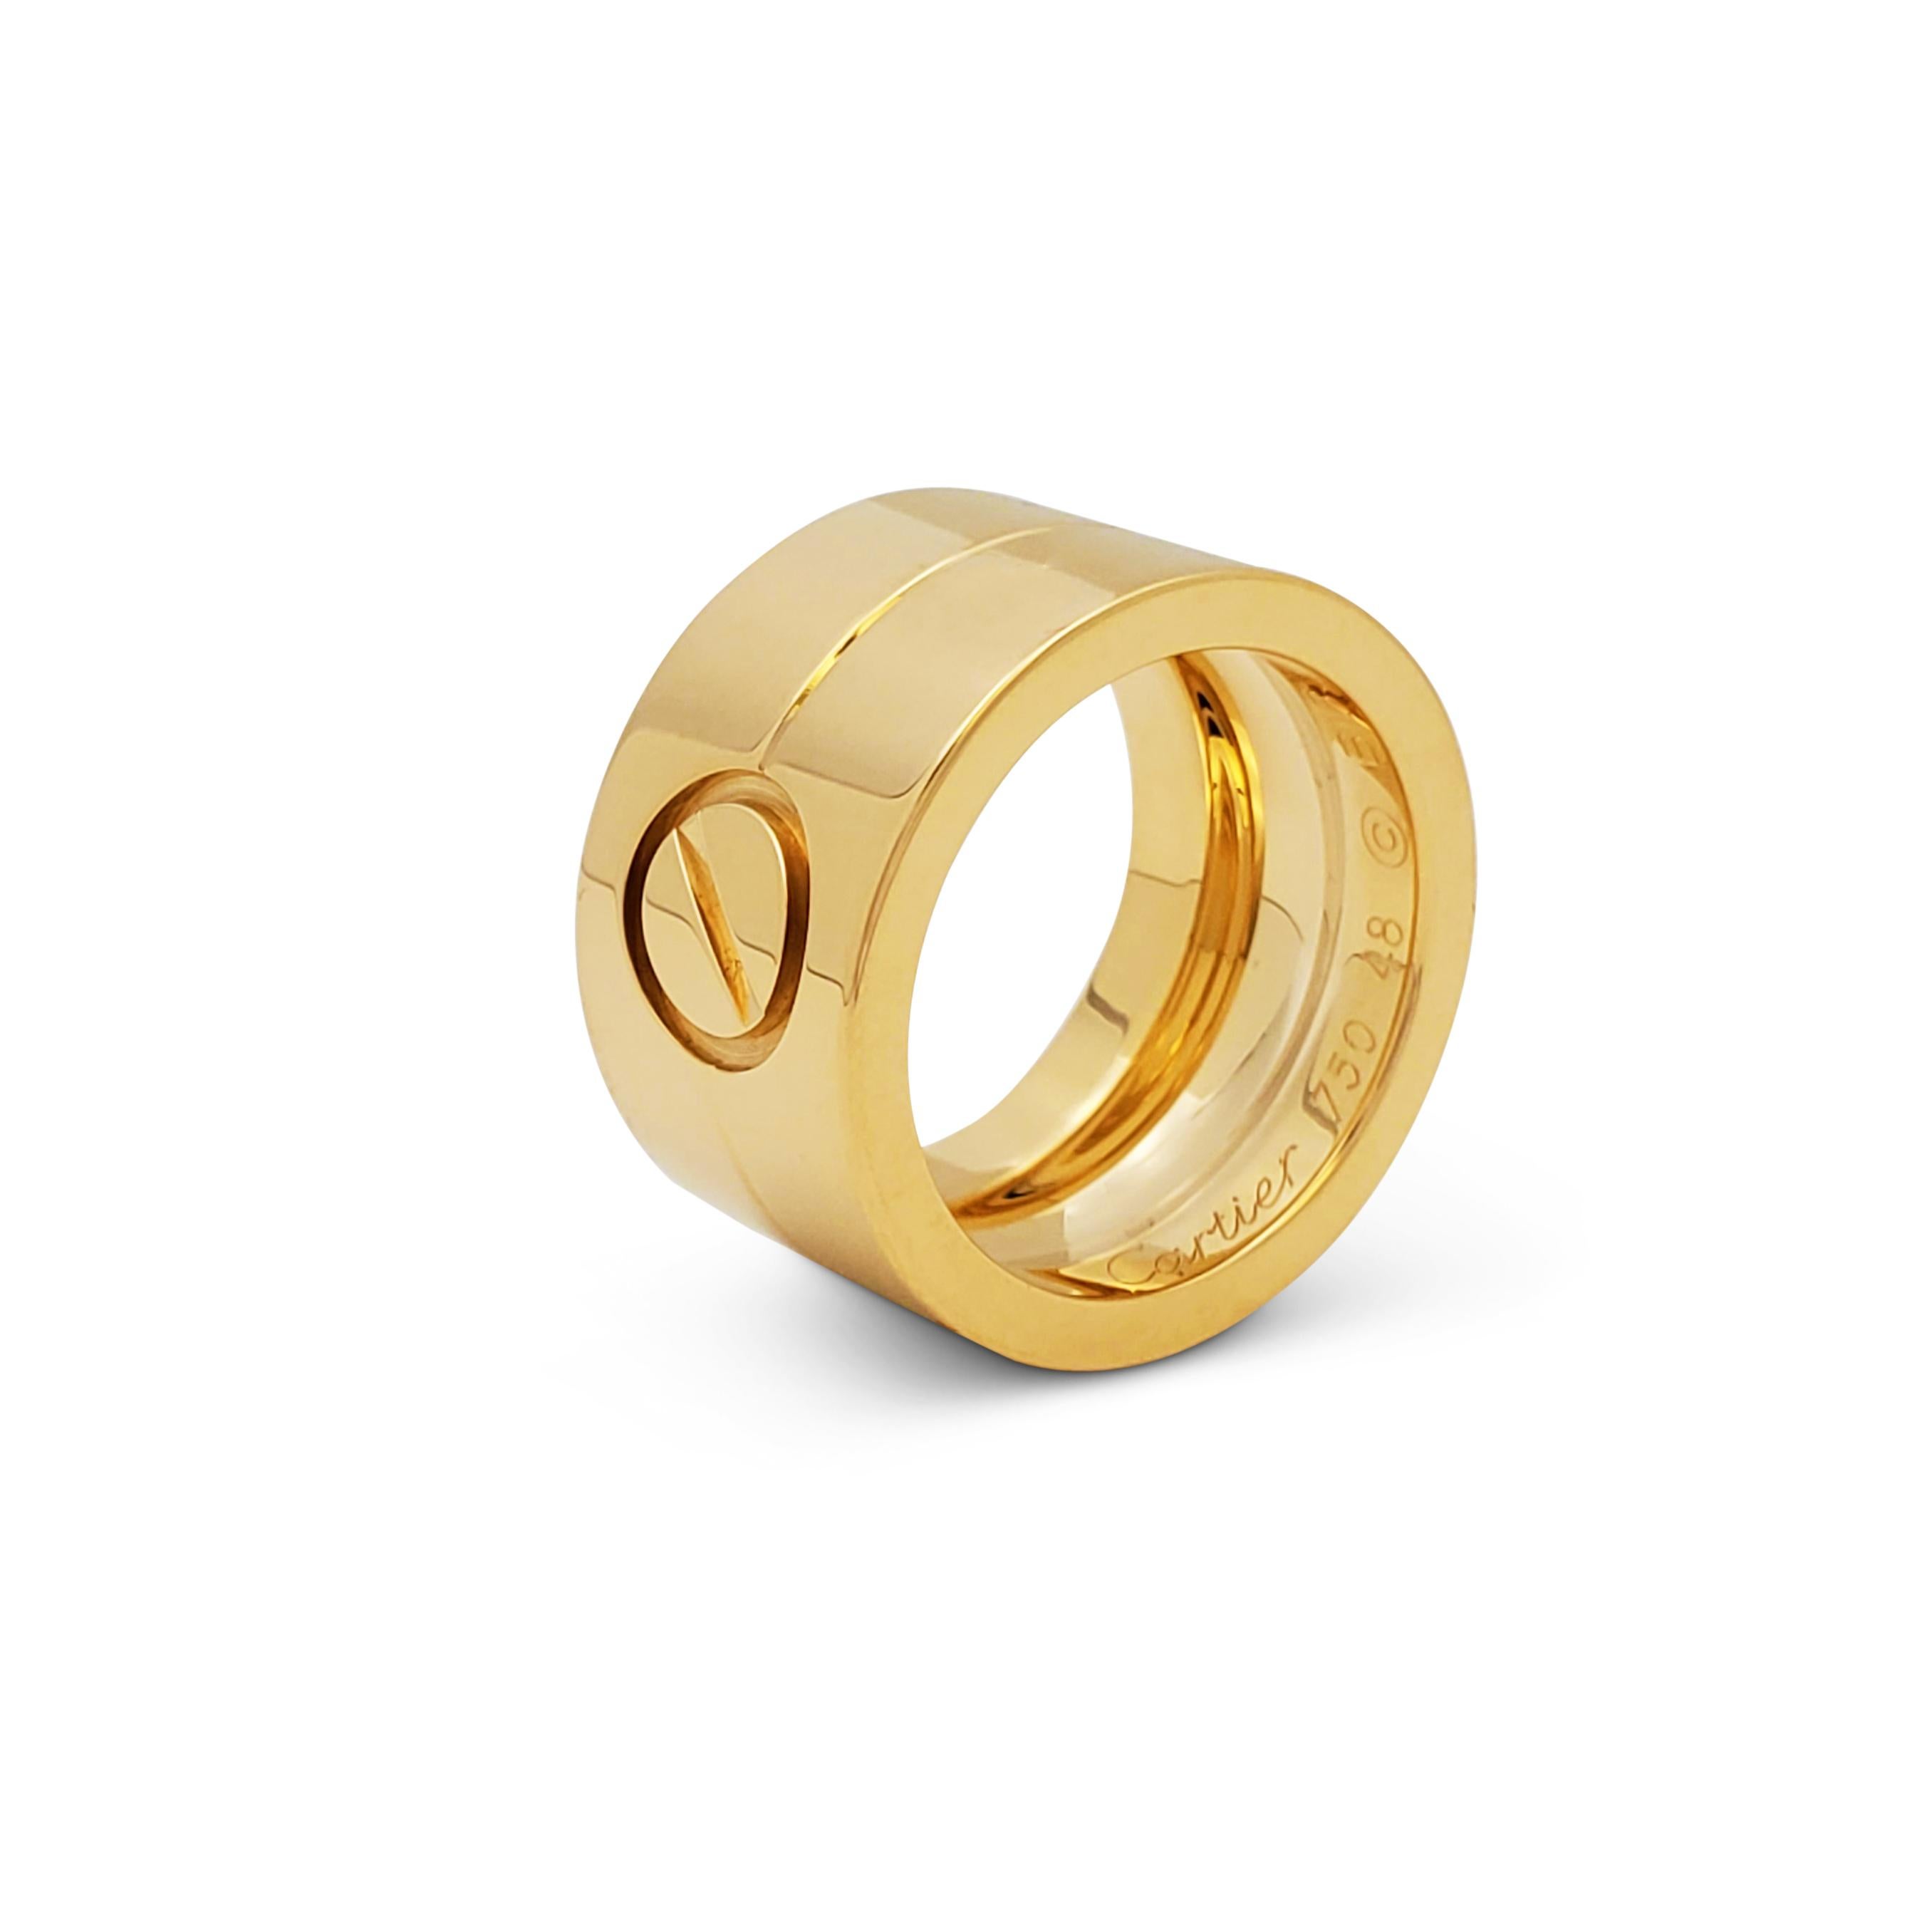 Authentic Cartier Love ring crafted in 18 karat yellow gold and featuring the brand's iconic screwtop design, represented here as a single motif.  Size 48, US 4 1/2.  Signed Cartier 750, 48, with serial number.  Ring is accompanied by Cartier pouch